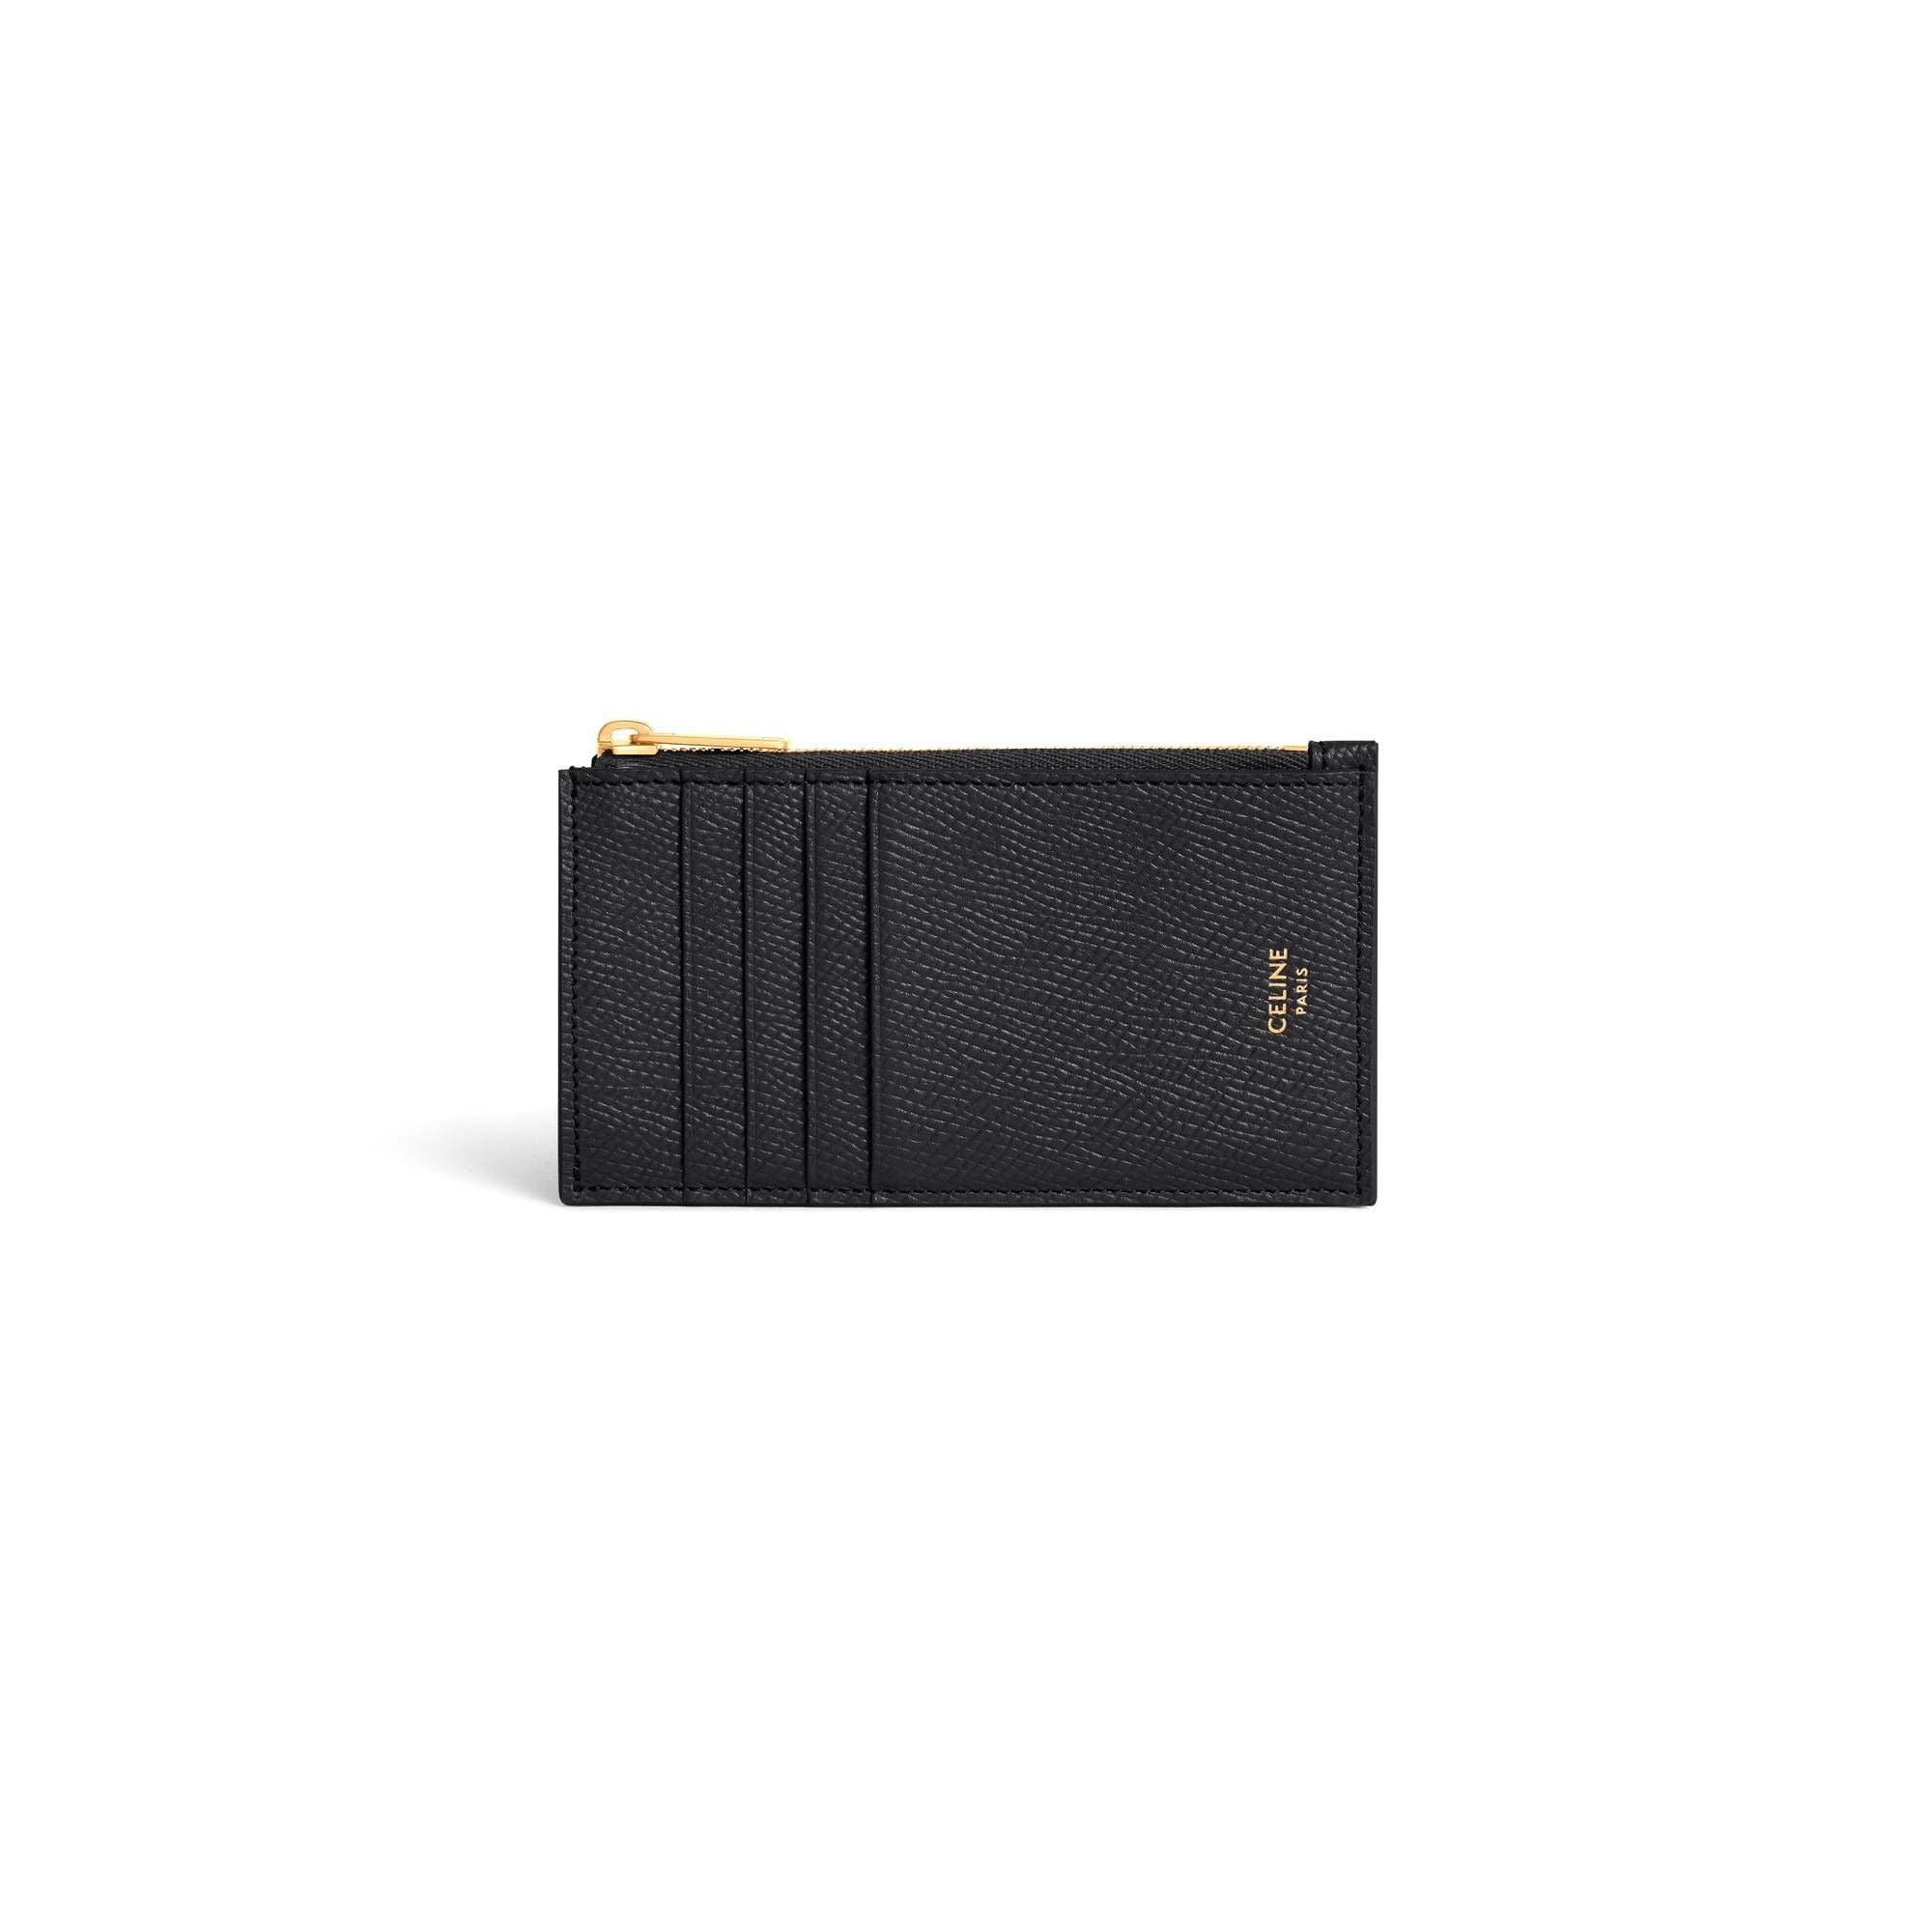 Celine Zipped Compact Card Holder in Black | Lyst